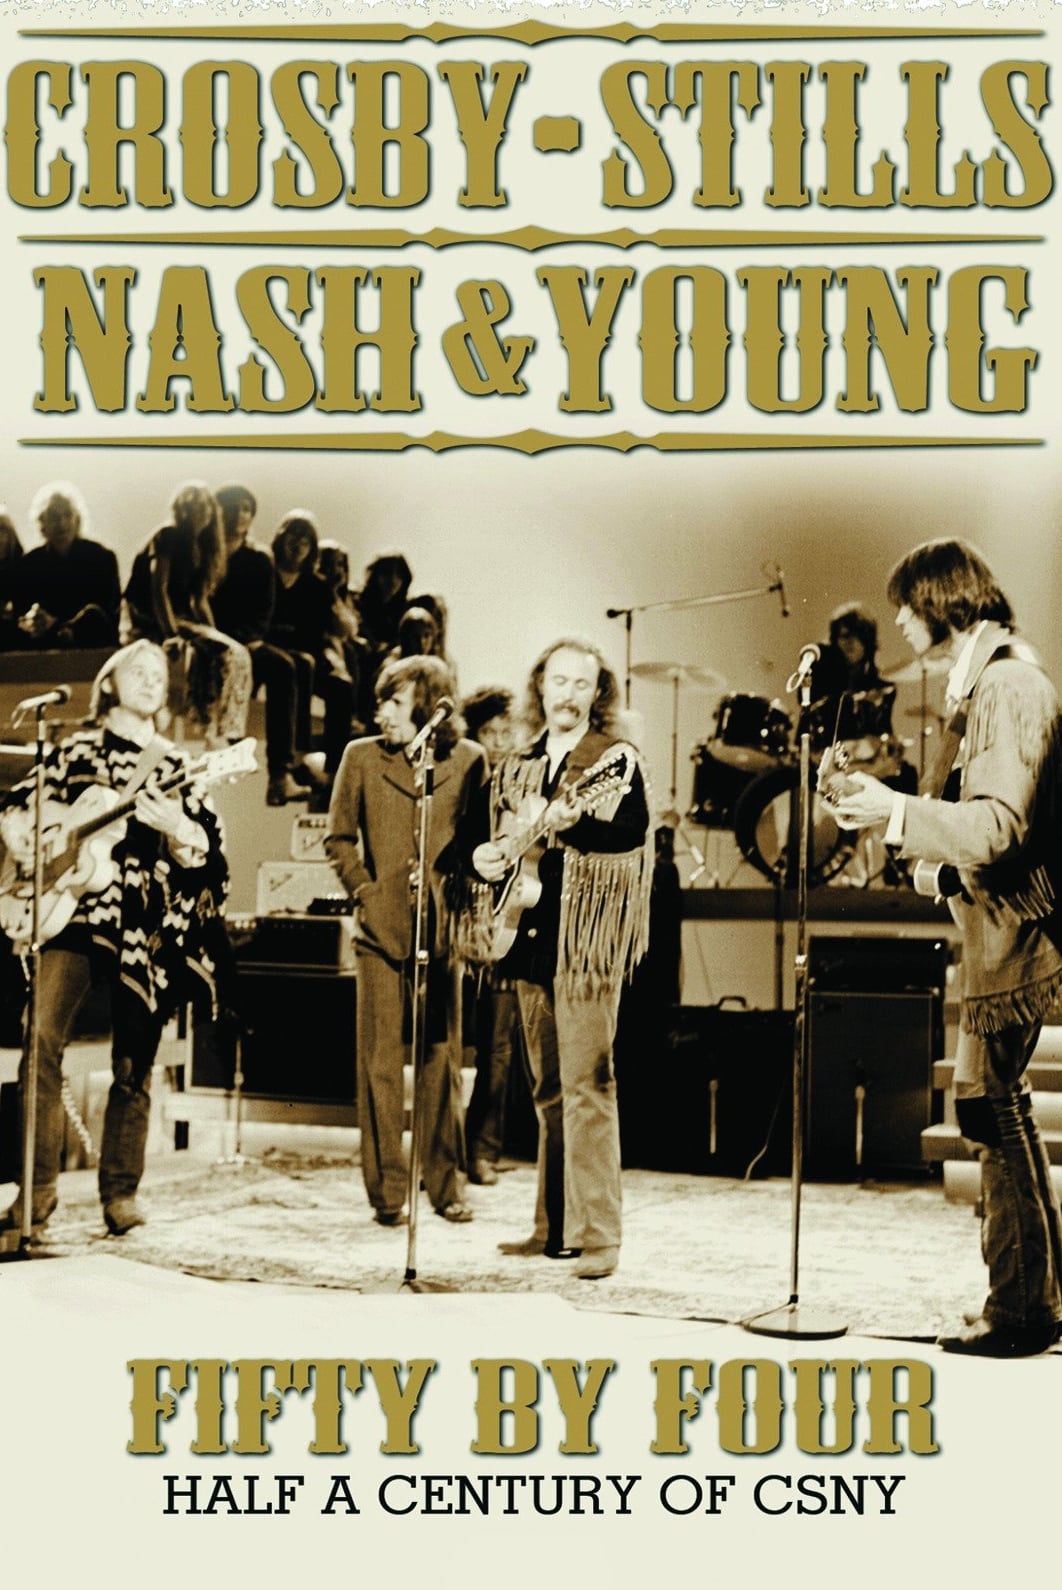 Crosby, Stills, Nash & Young: Fifty by Four - Half a Century of CSNY